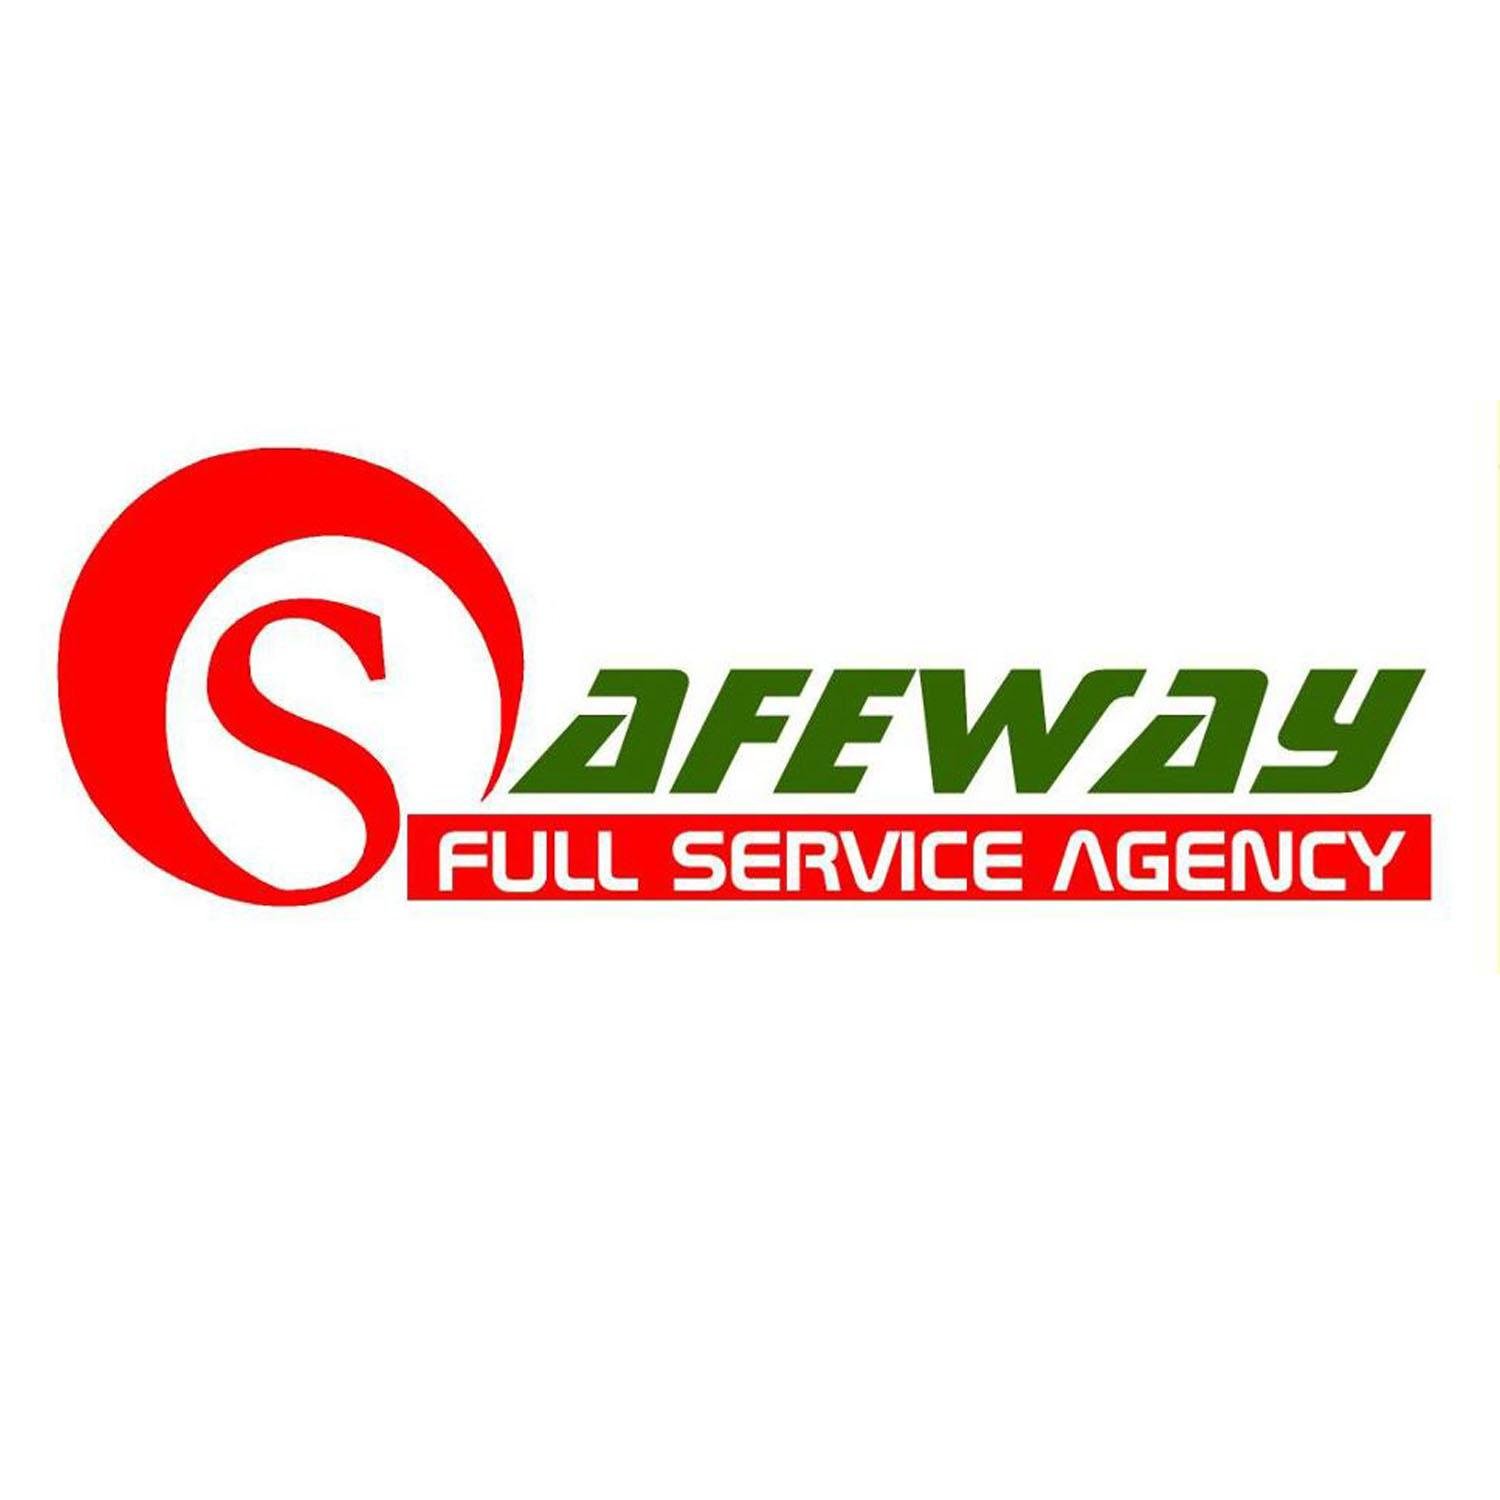 safeway full service agency was established on 2069 B.S with the purpose of carrying out the functions such as event management ,Advertising,supplier & Promtion